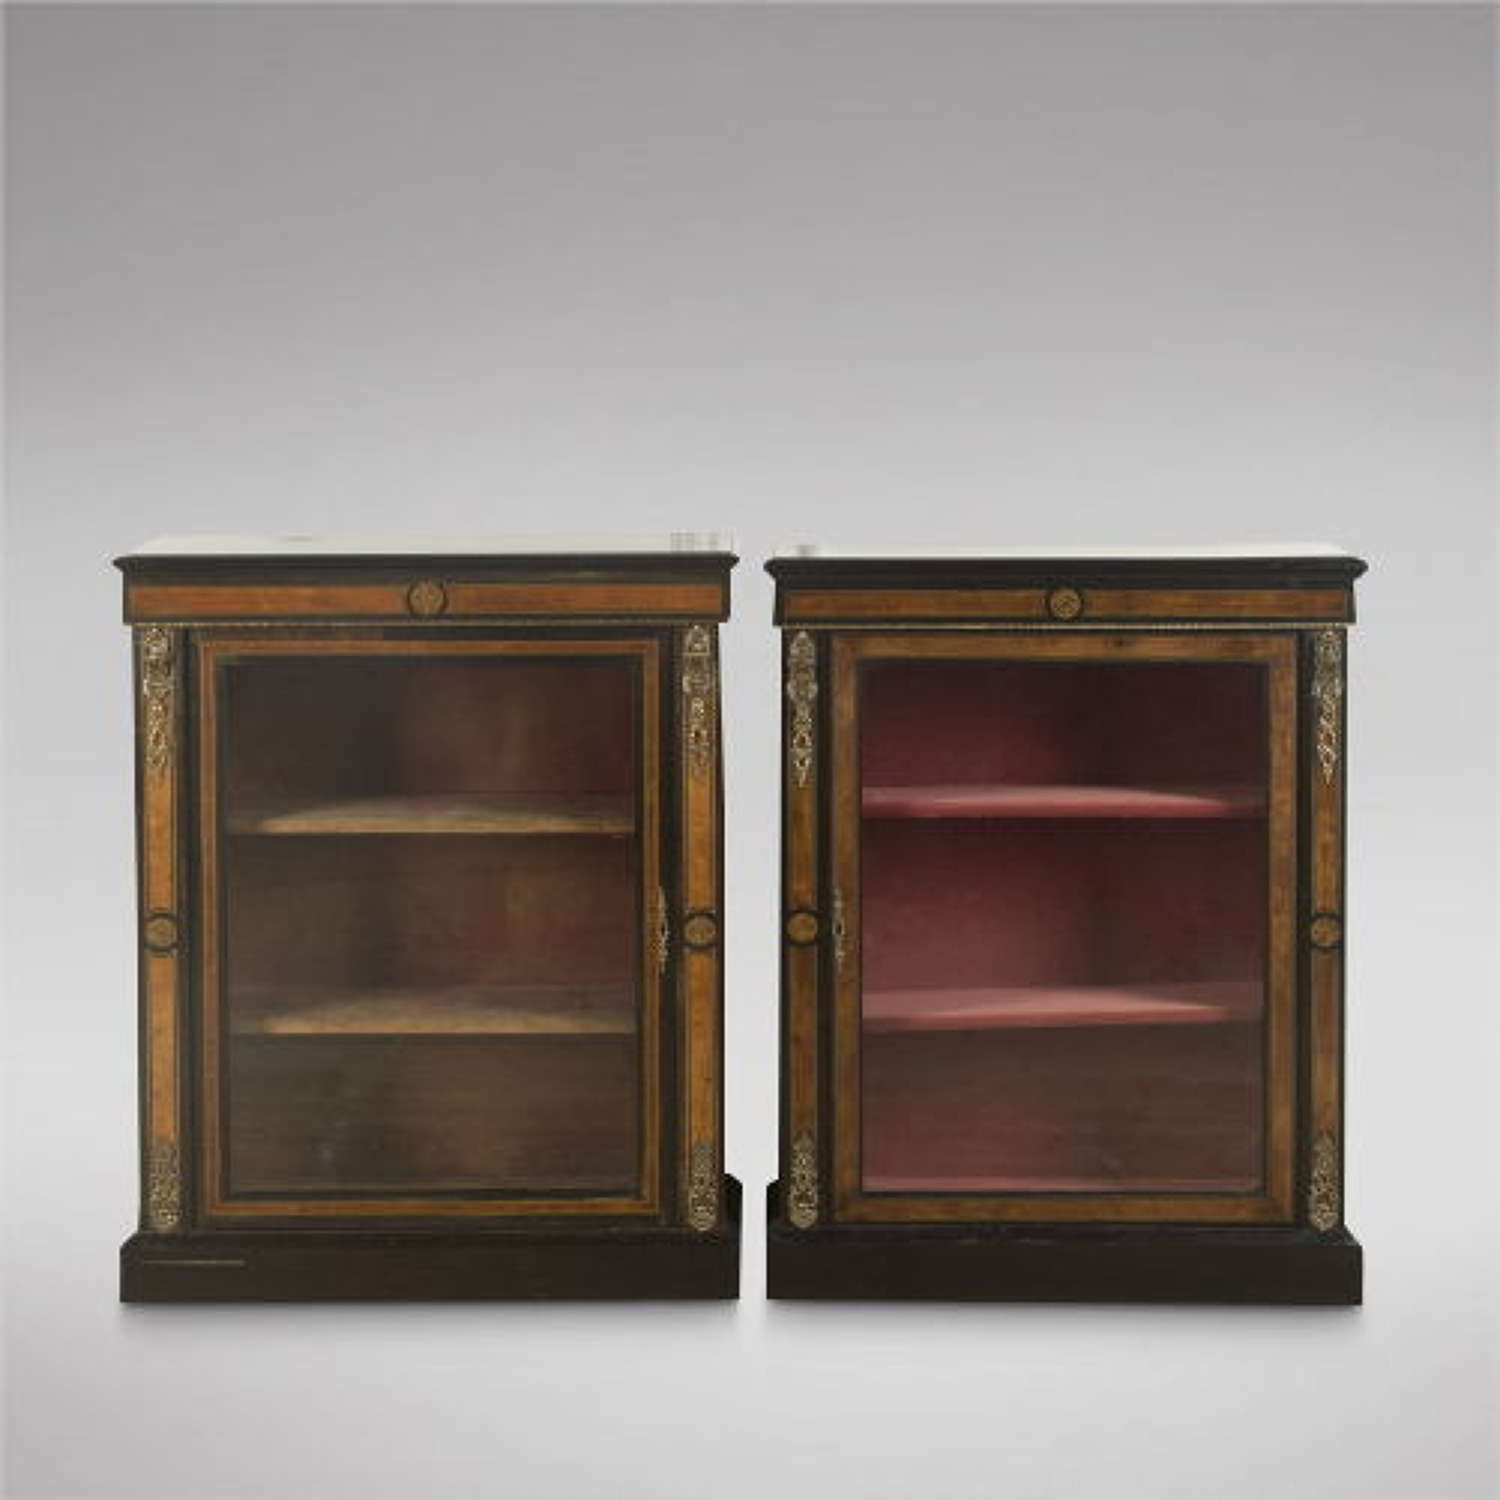 Pair of 19th Century Pier Cabinets